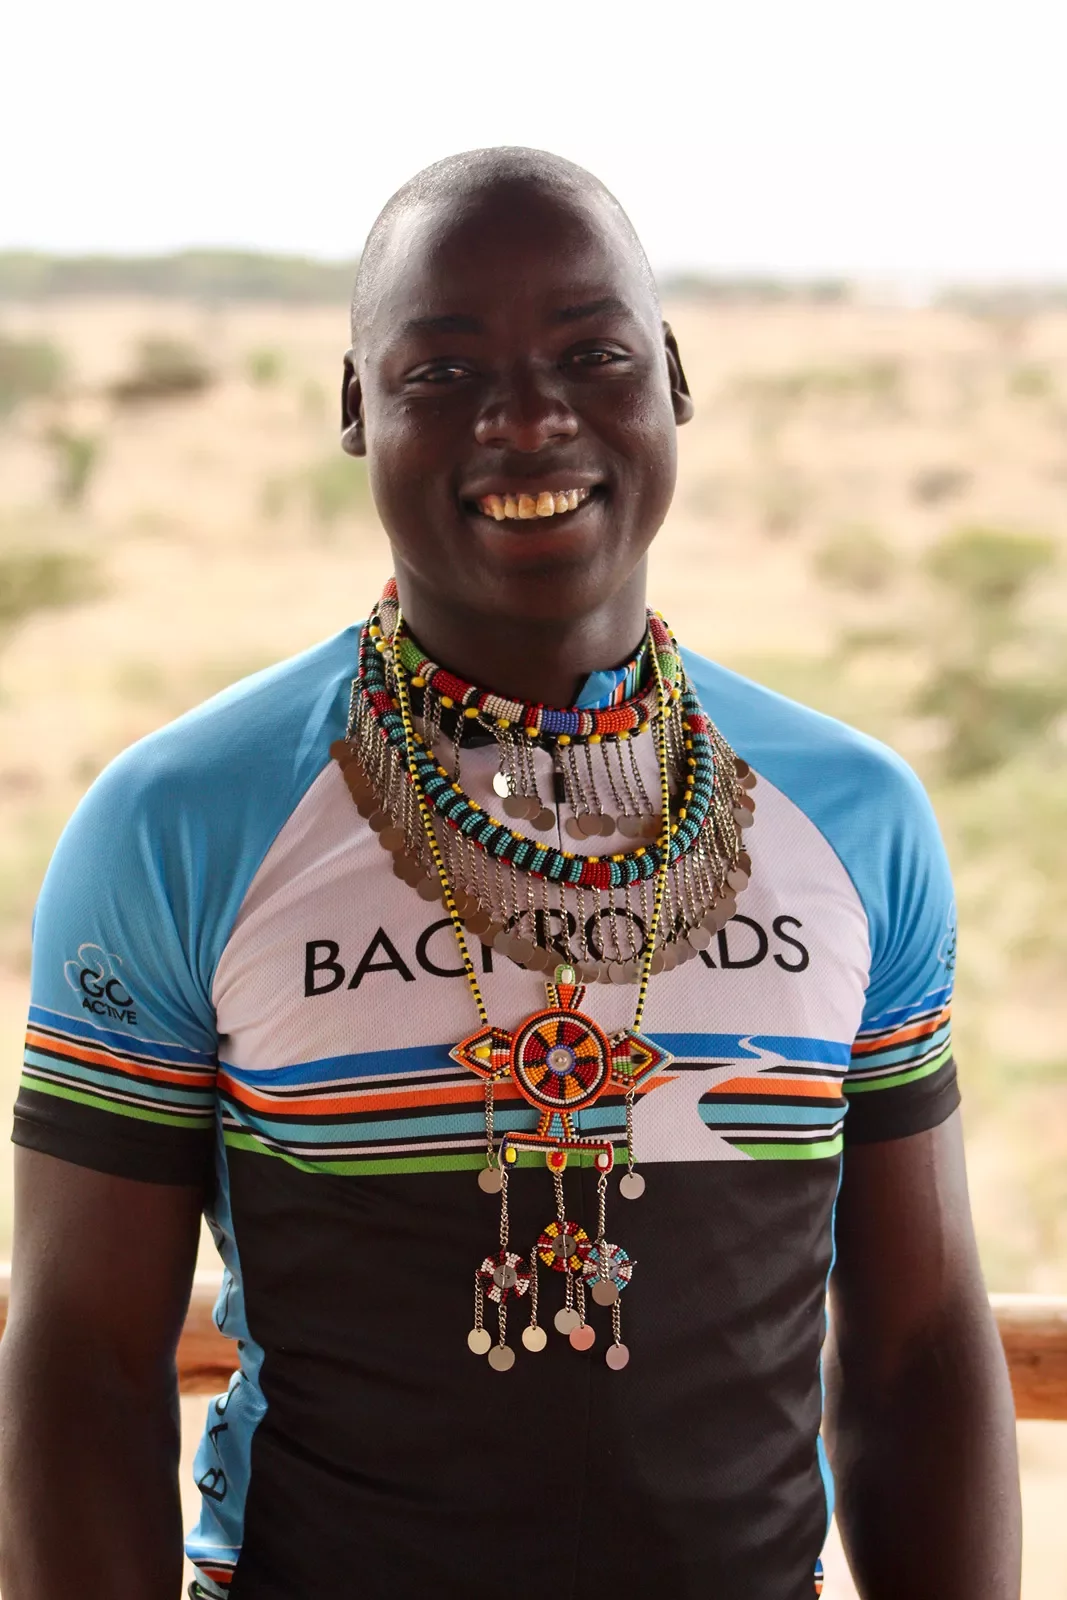 Backroads cyclist wearing traditional local jewelry